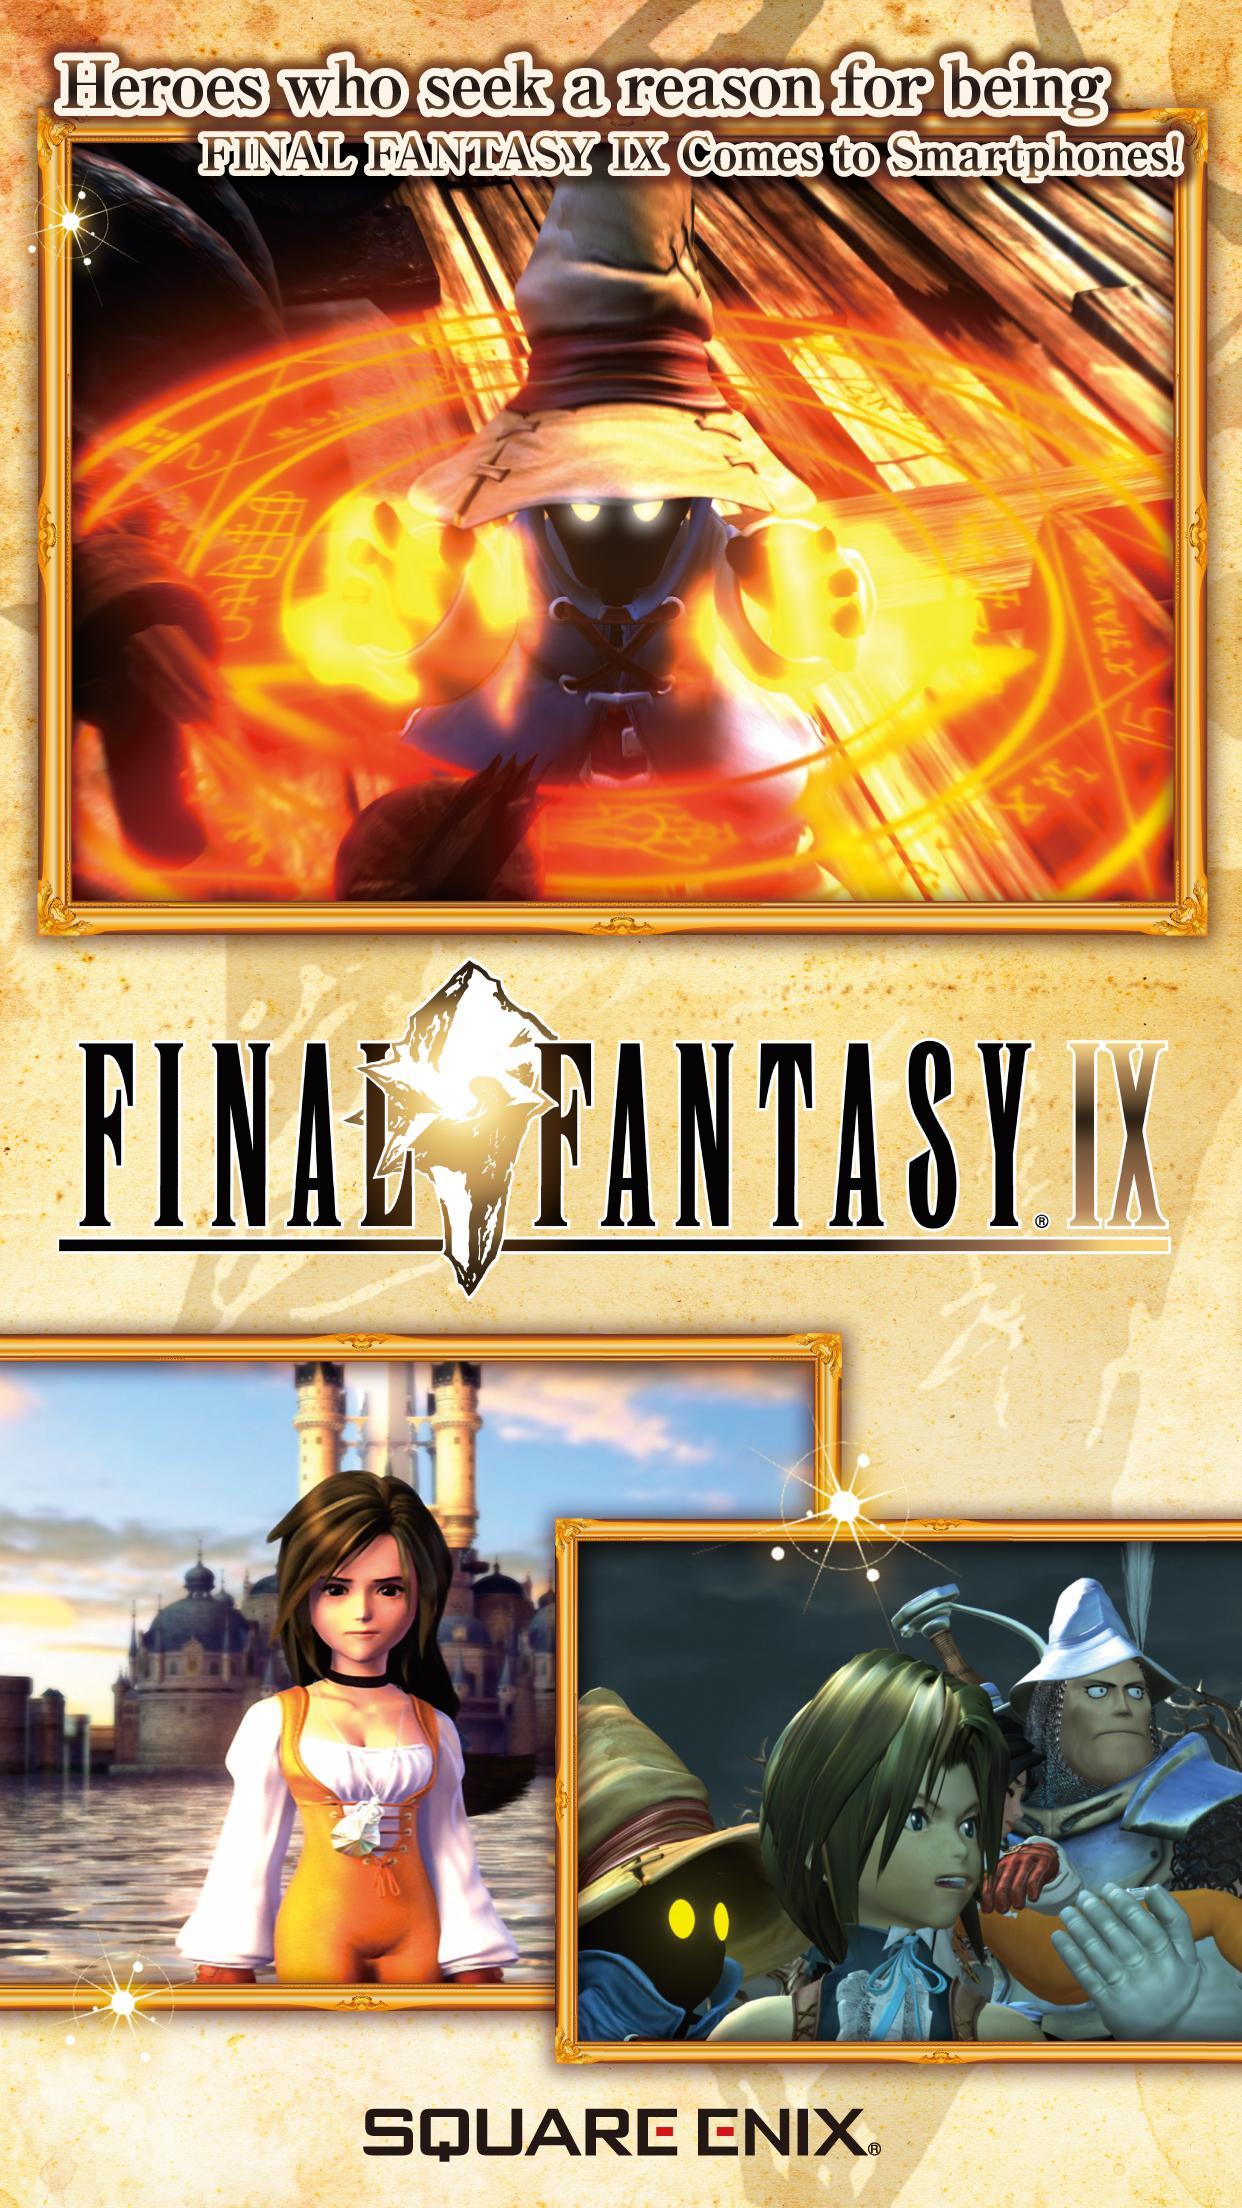 Screenshot 1 of FINAL FANTASY IX សម្រាប់ Android 